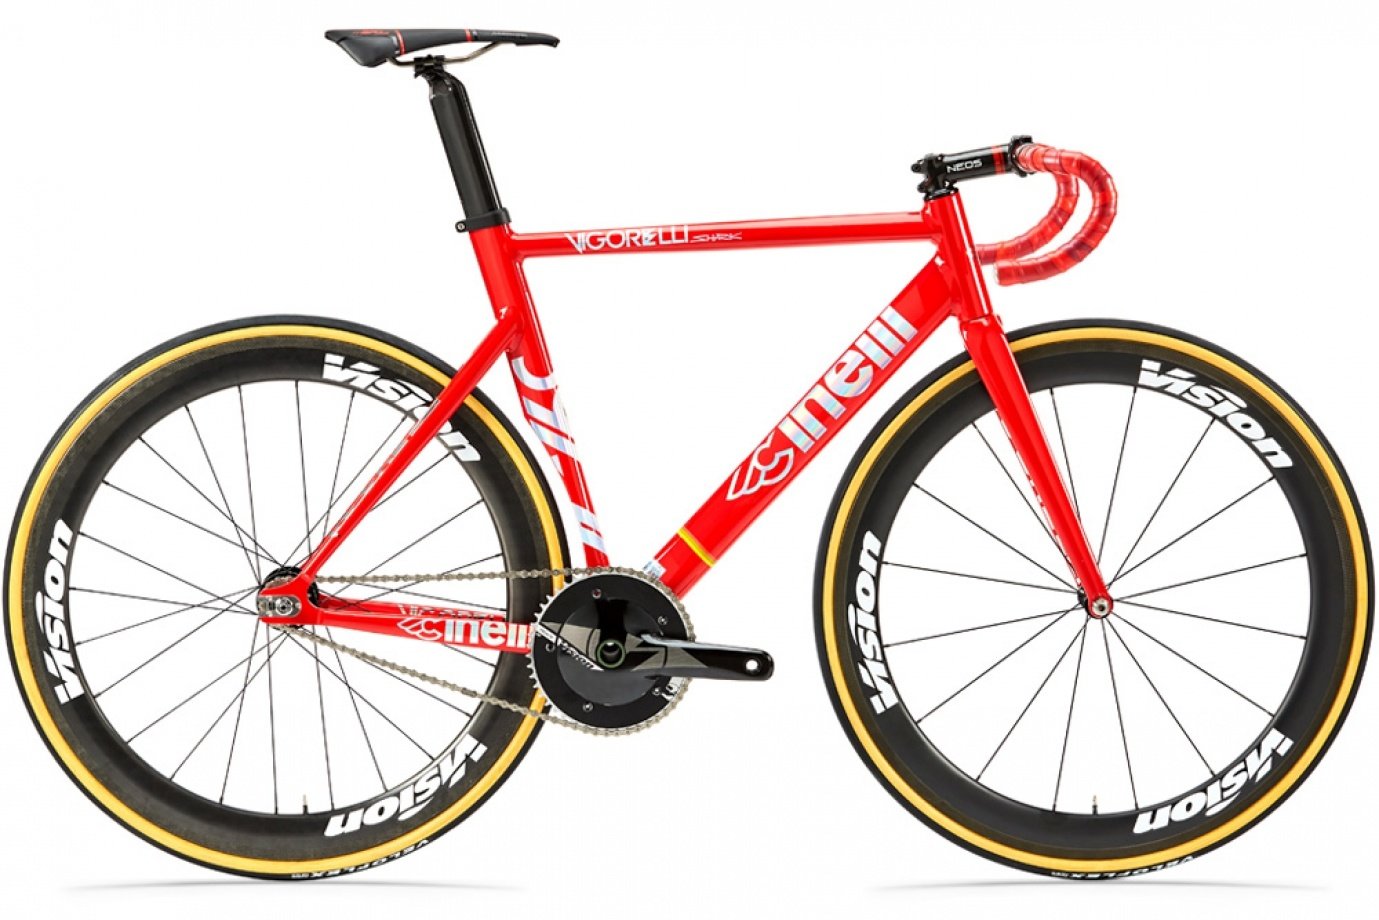 Cinelli red, sport and aerodynamic single speed with just one gear, sport seat and dropped sport bars.